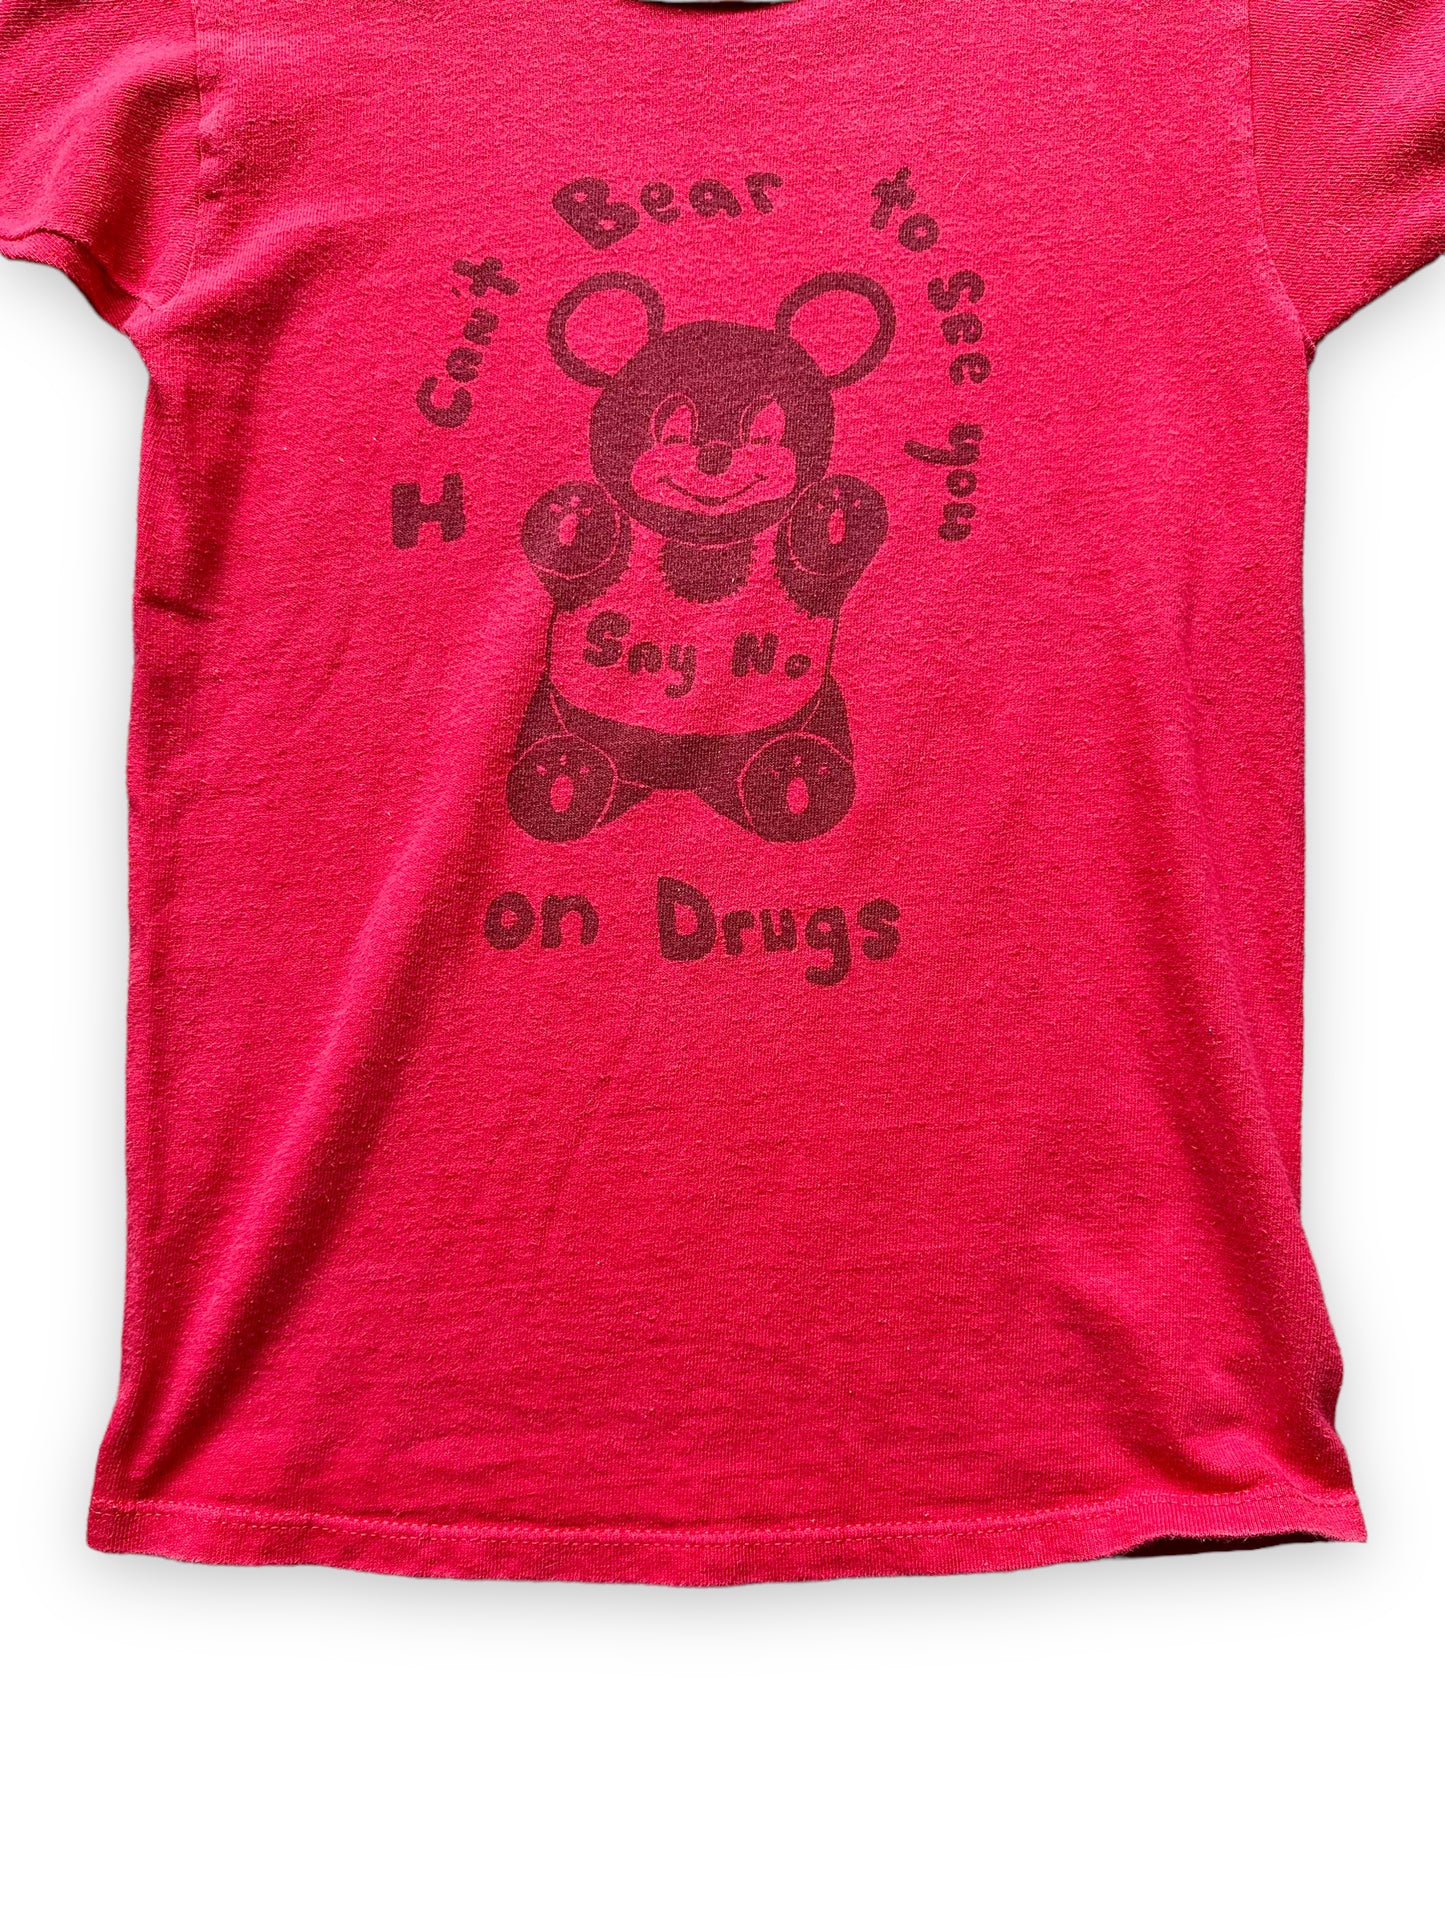 Lower Front View of Vintage I Can't Bear To See You On Drugs Graphic Tee SZ S |  Vintage Champion Tee Seattle | Barn Owl Vintage